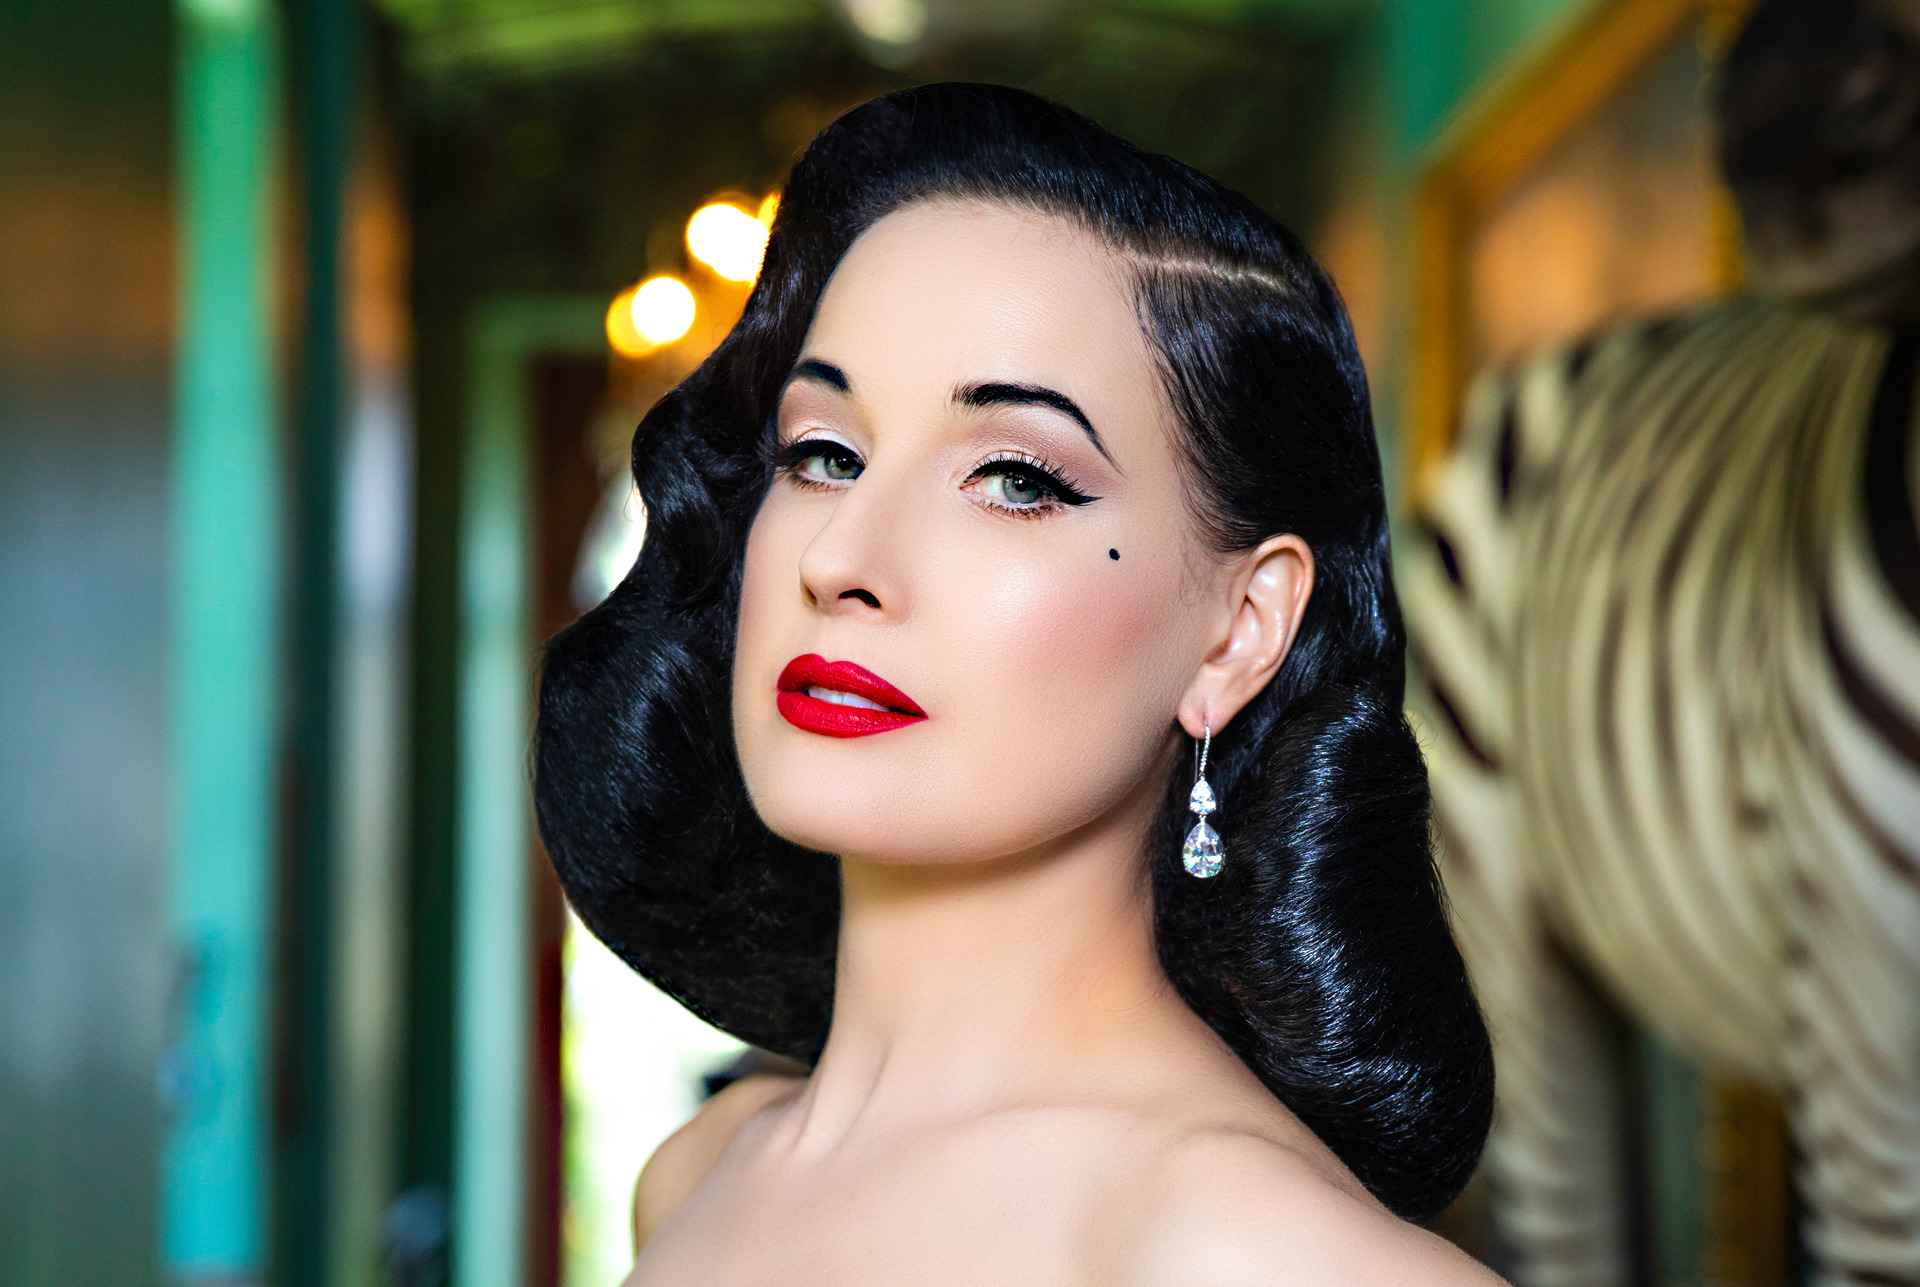 Dita Von Teese Likes to Go Where the Old Folks Hang Out